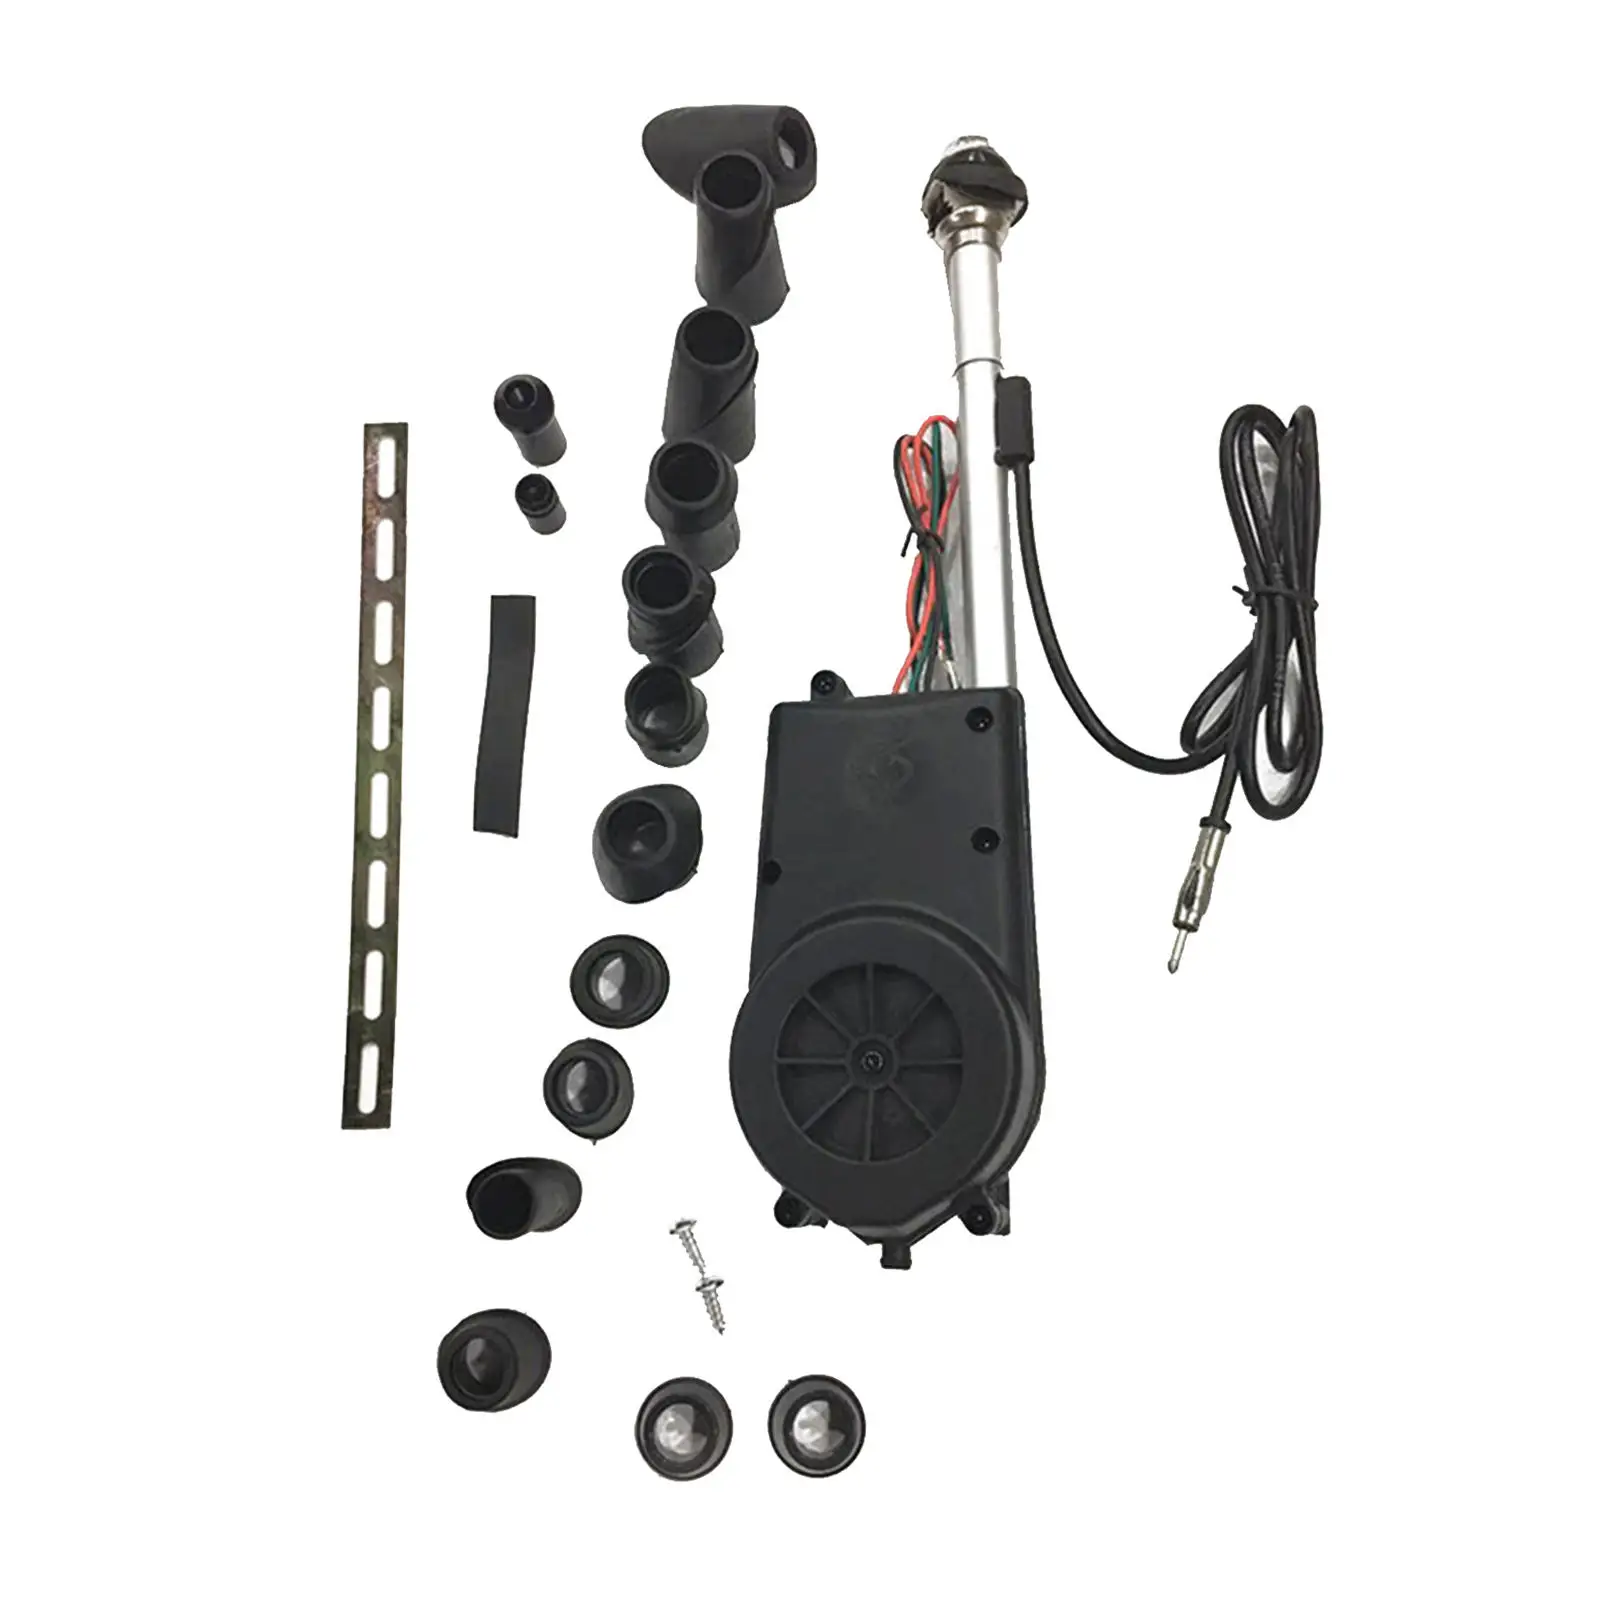 Auto SUV Car Electric Power Antenna Assembly and Mount Head Set for AM/FM Radio, Spare Parts